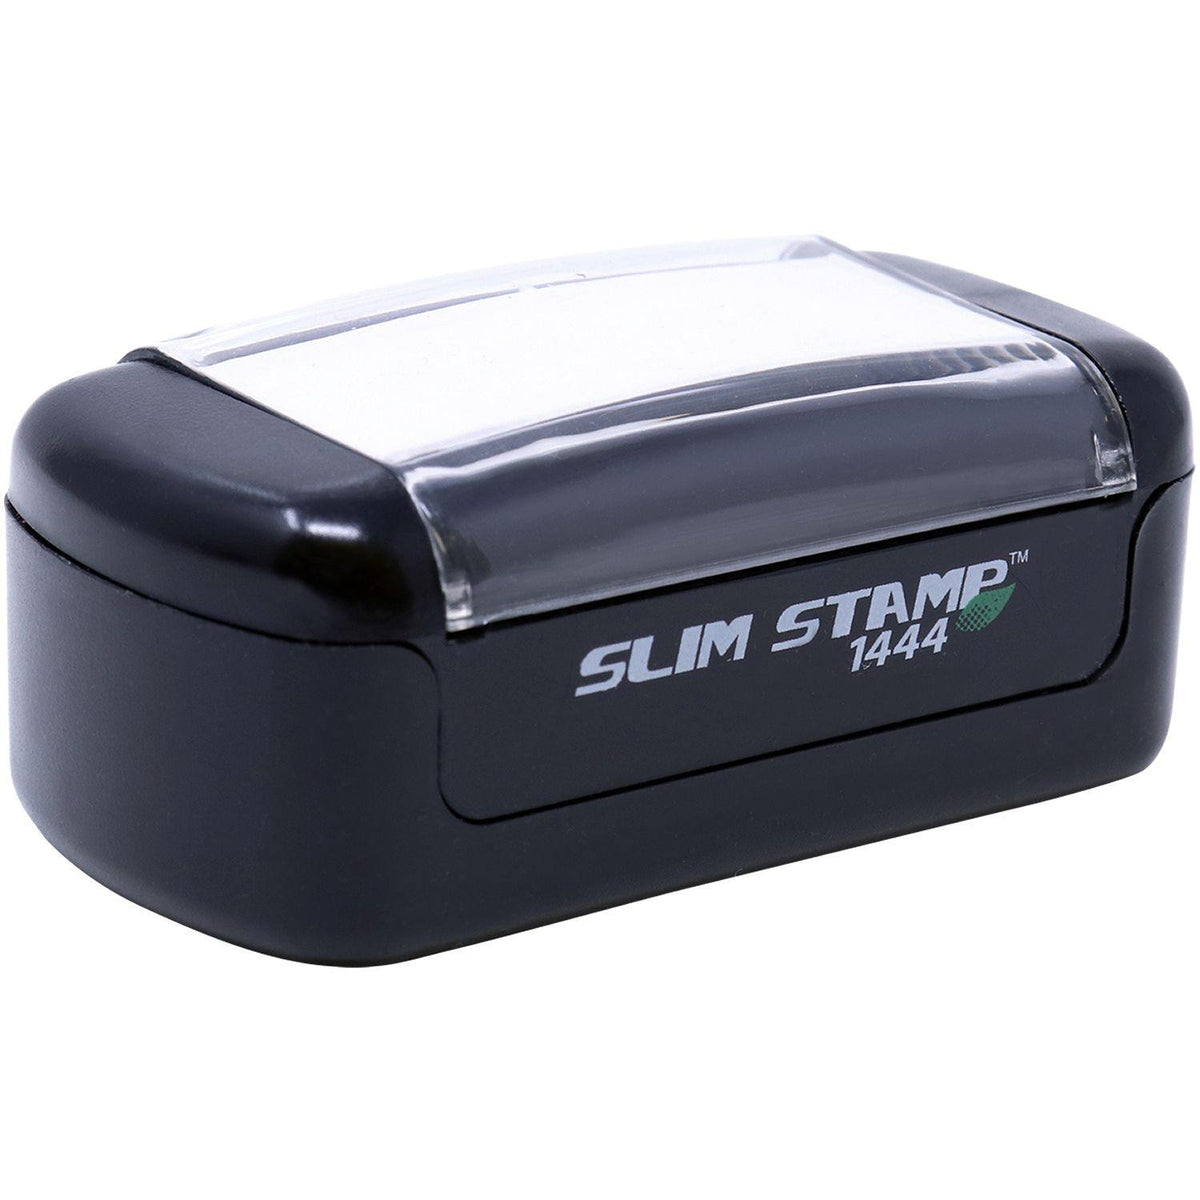 Alt View of Slim Pre Inked Terrific Stamp Mount Angle